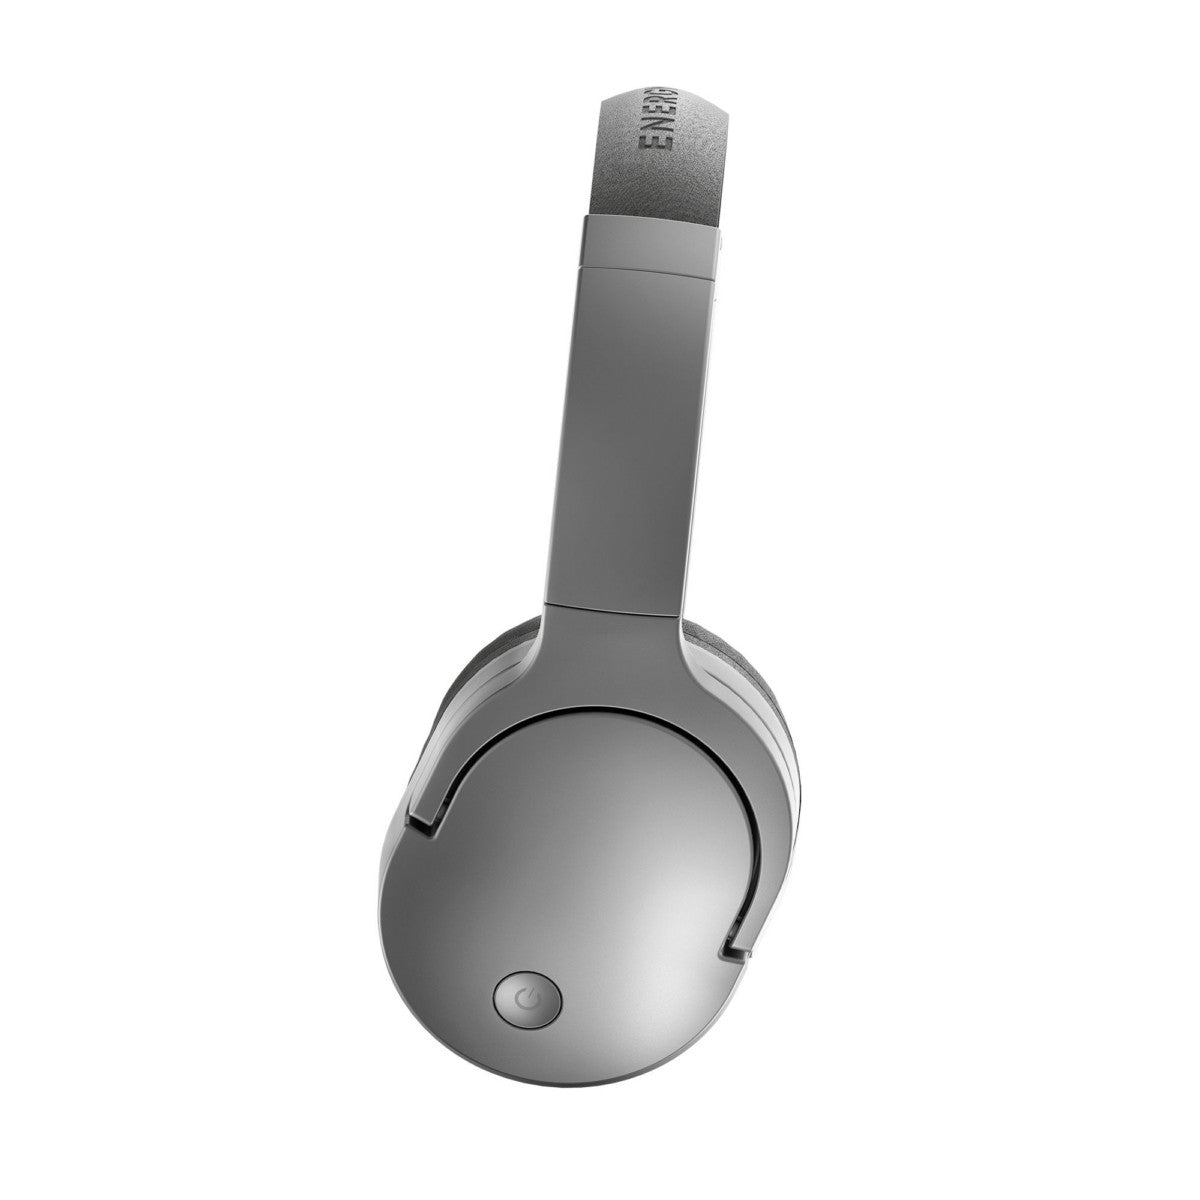 Energy Sistem 449514 BT Travel 5 ANC Bluetooth Headphones with Active Noise Cancelling Silver